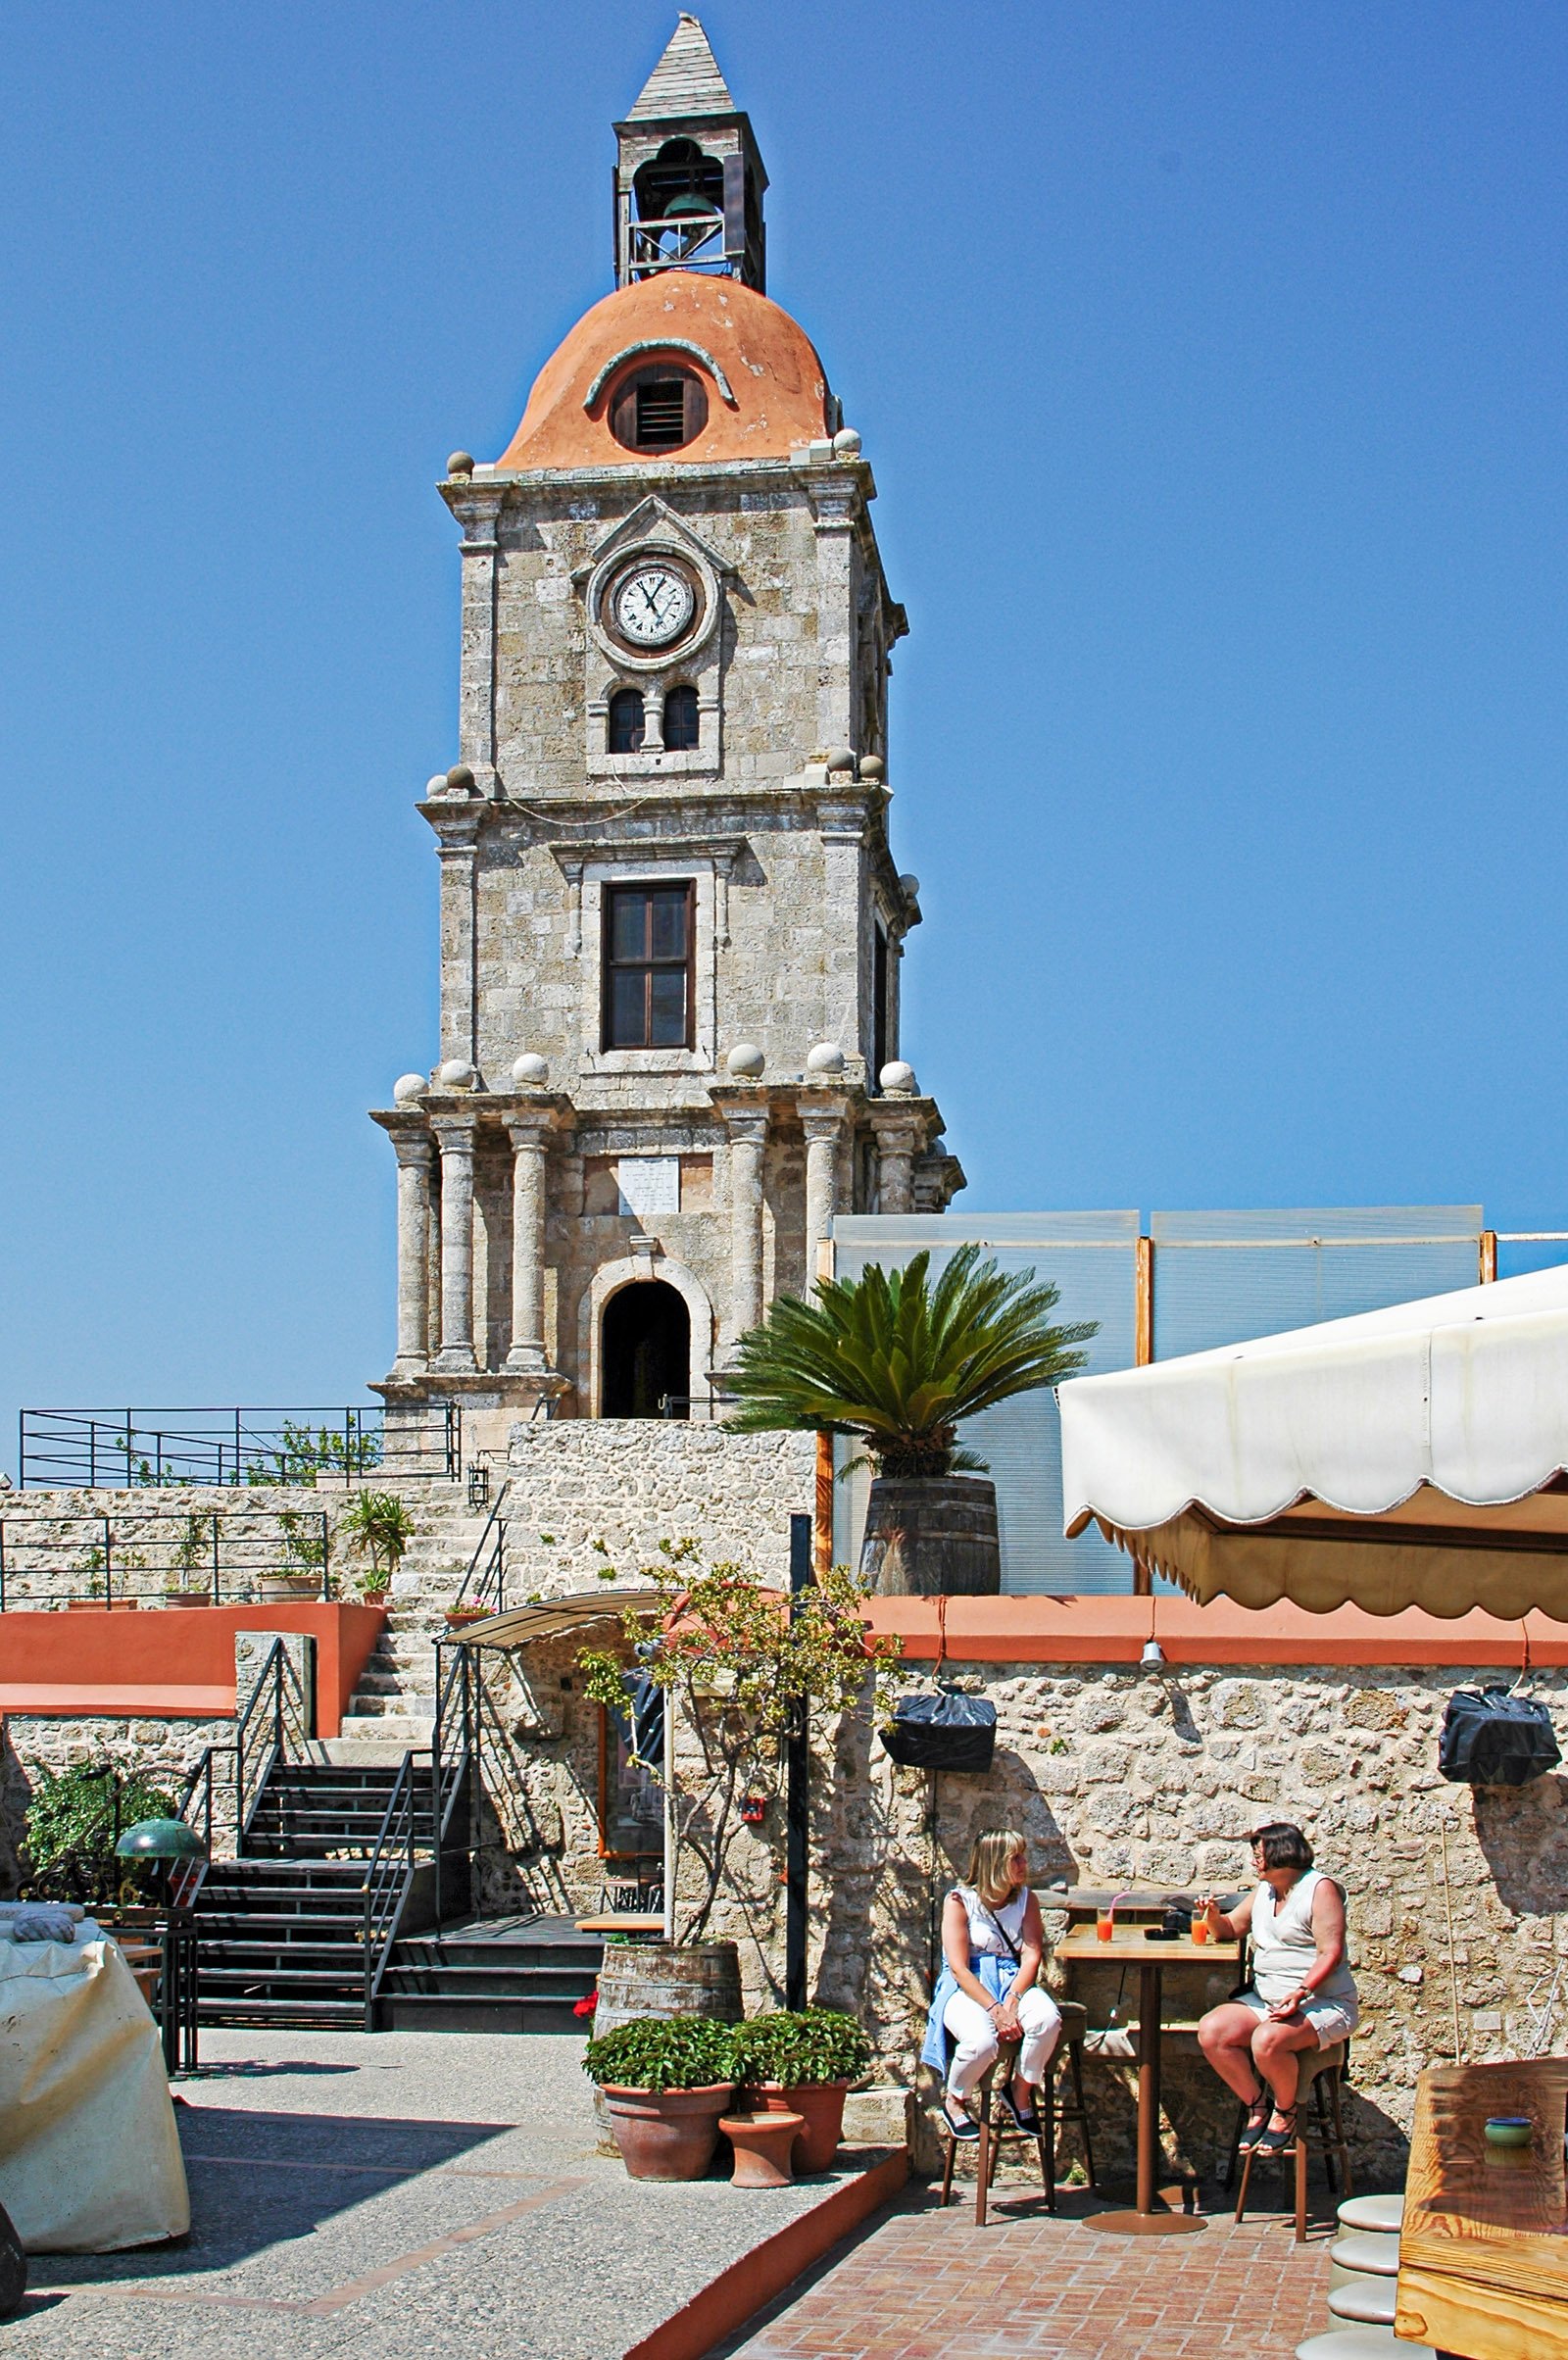 The Rhodes clock tower